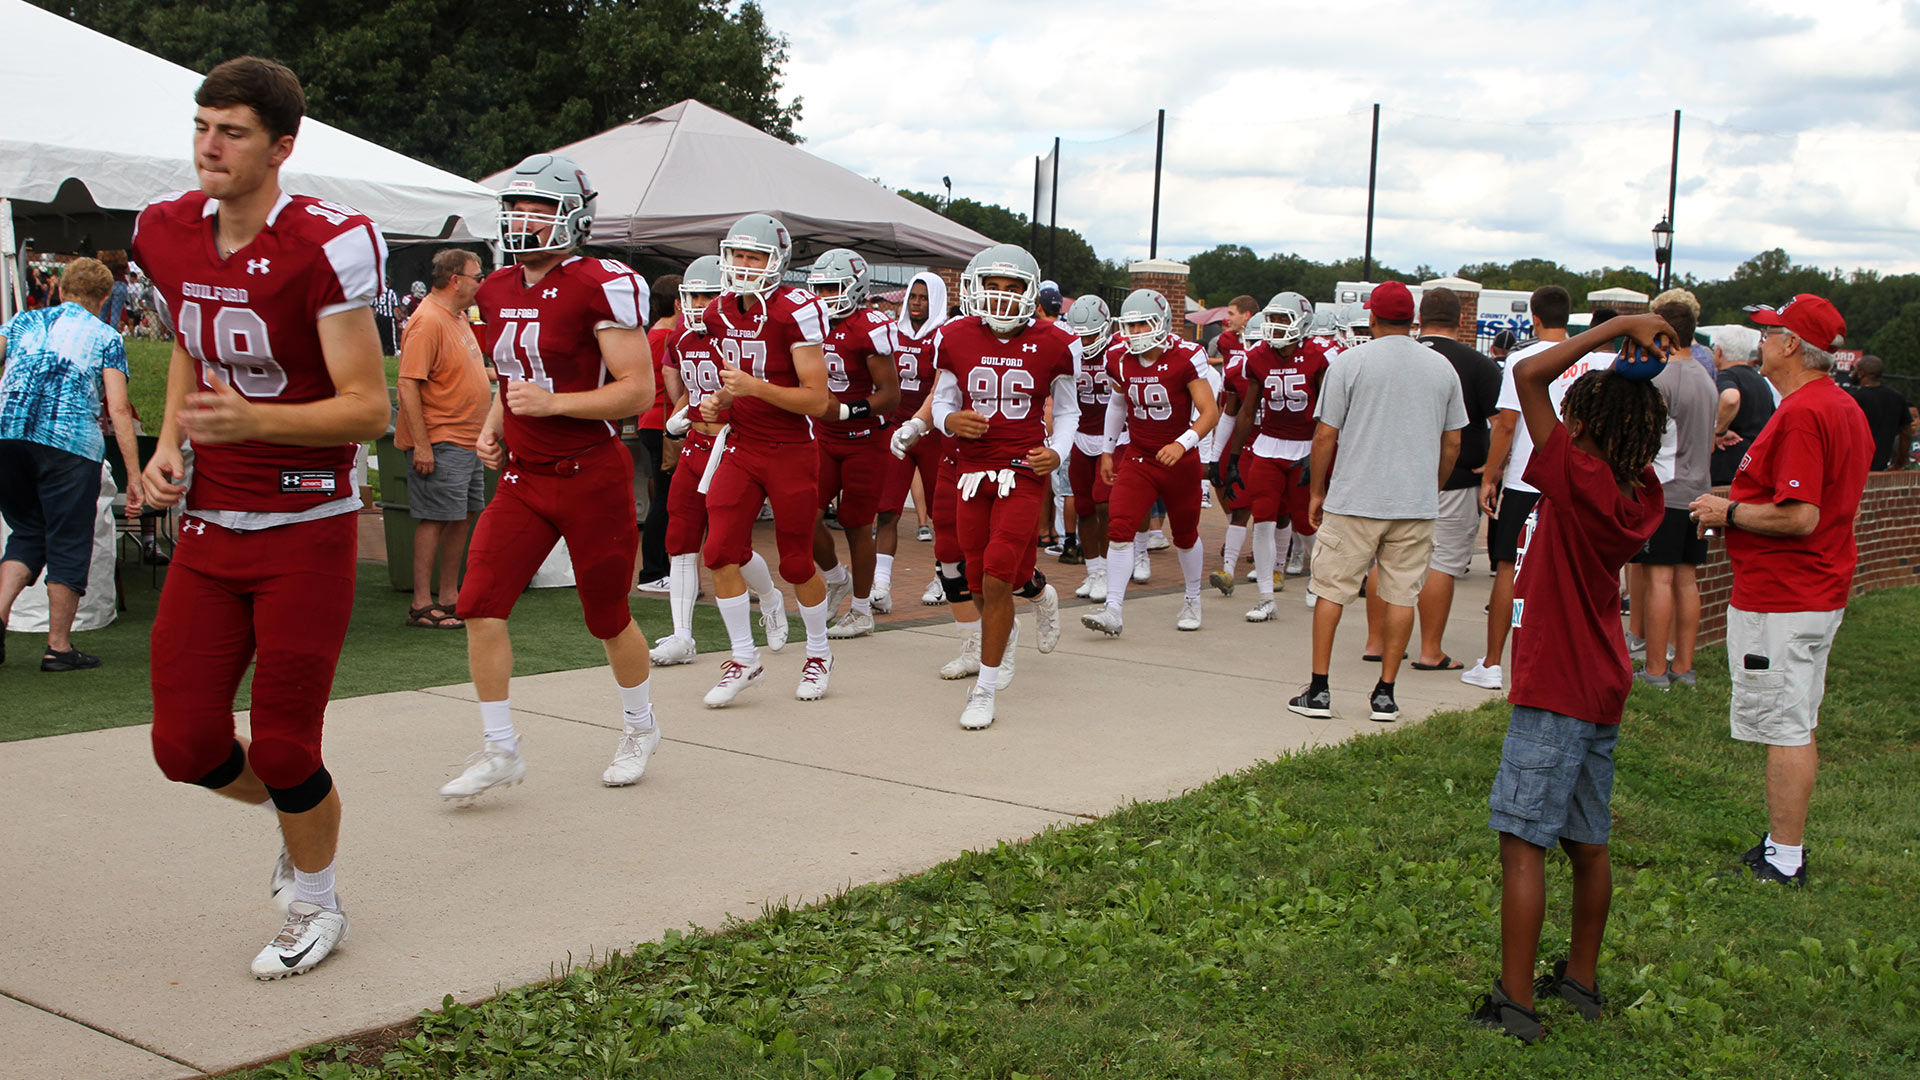 The Guilford College football team takes the field at Homecoming.